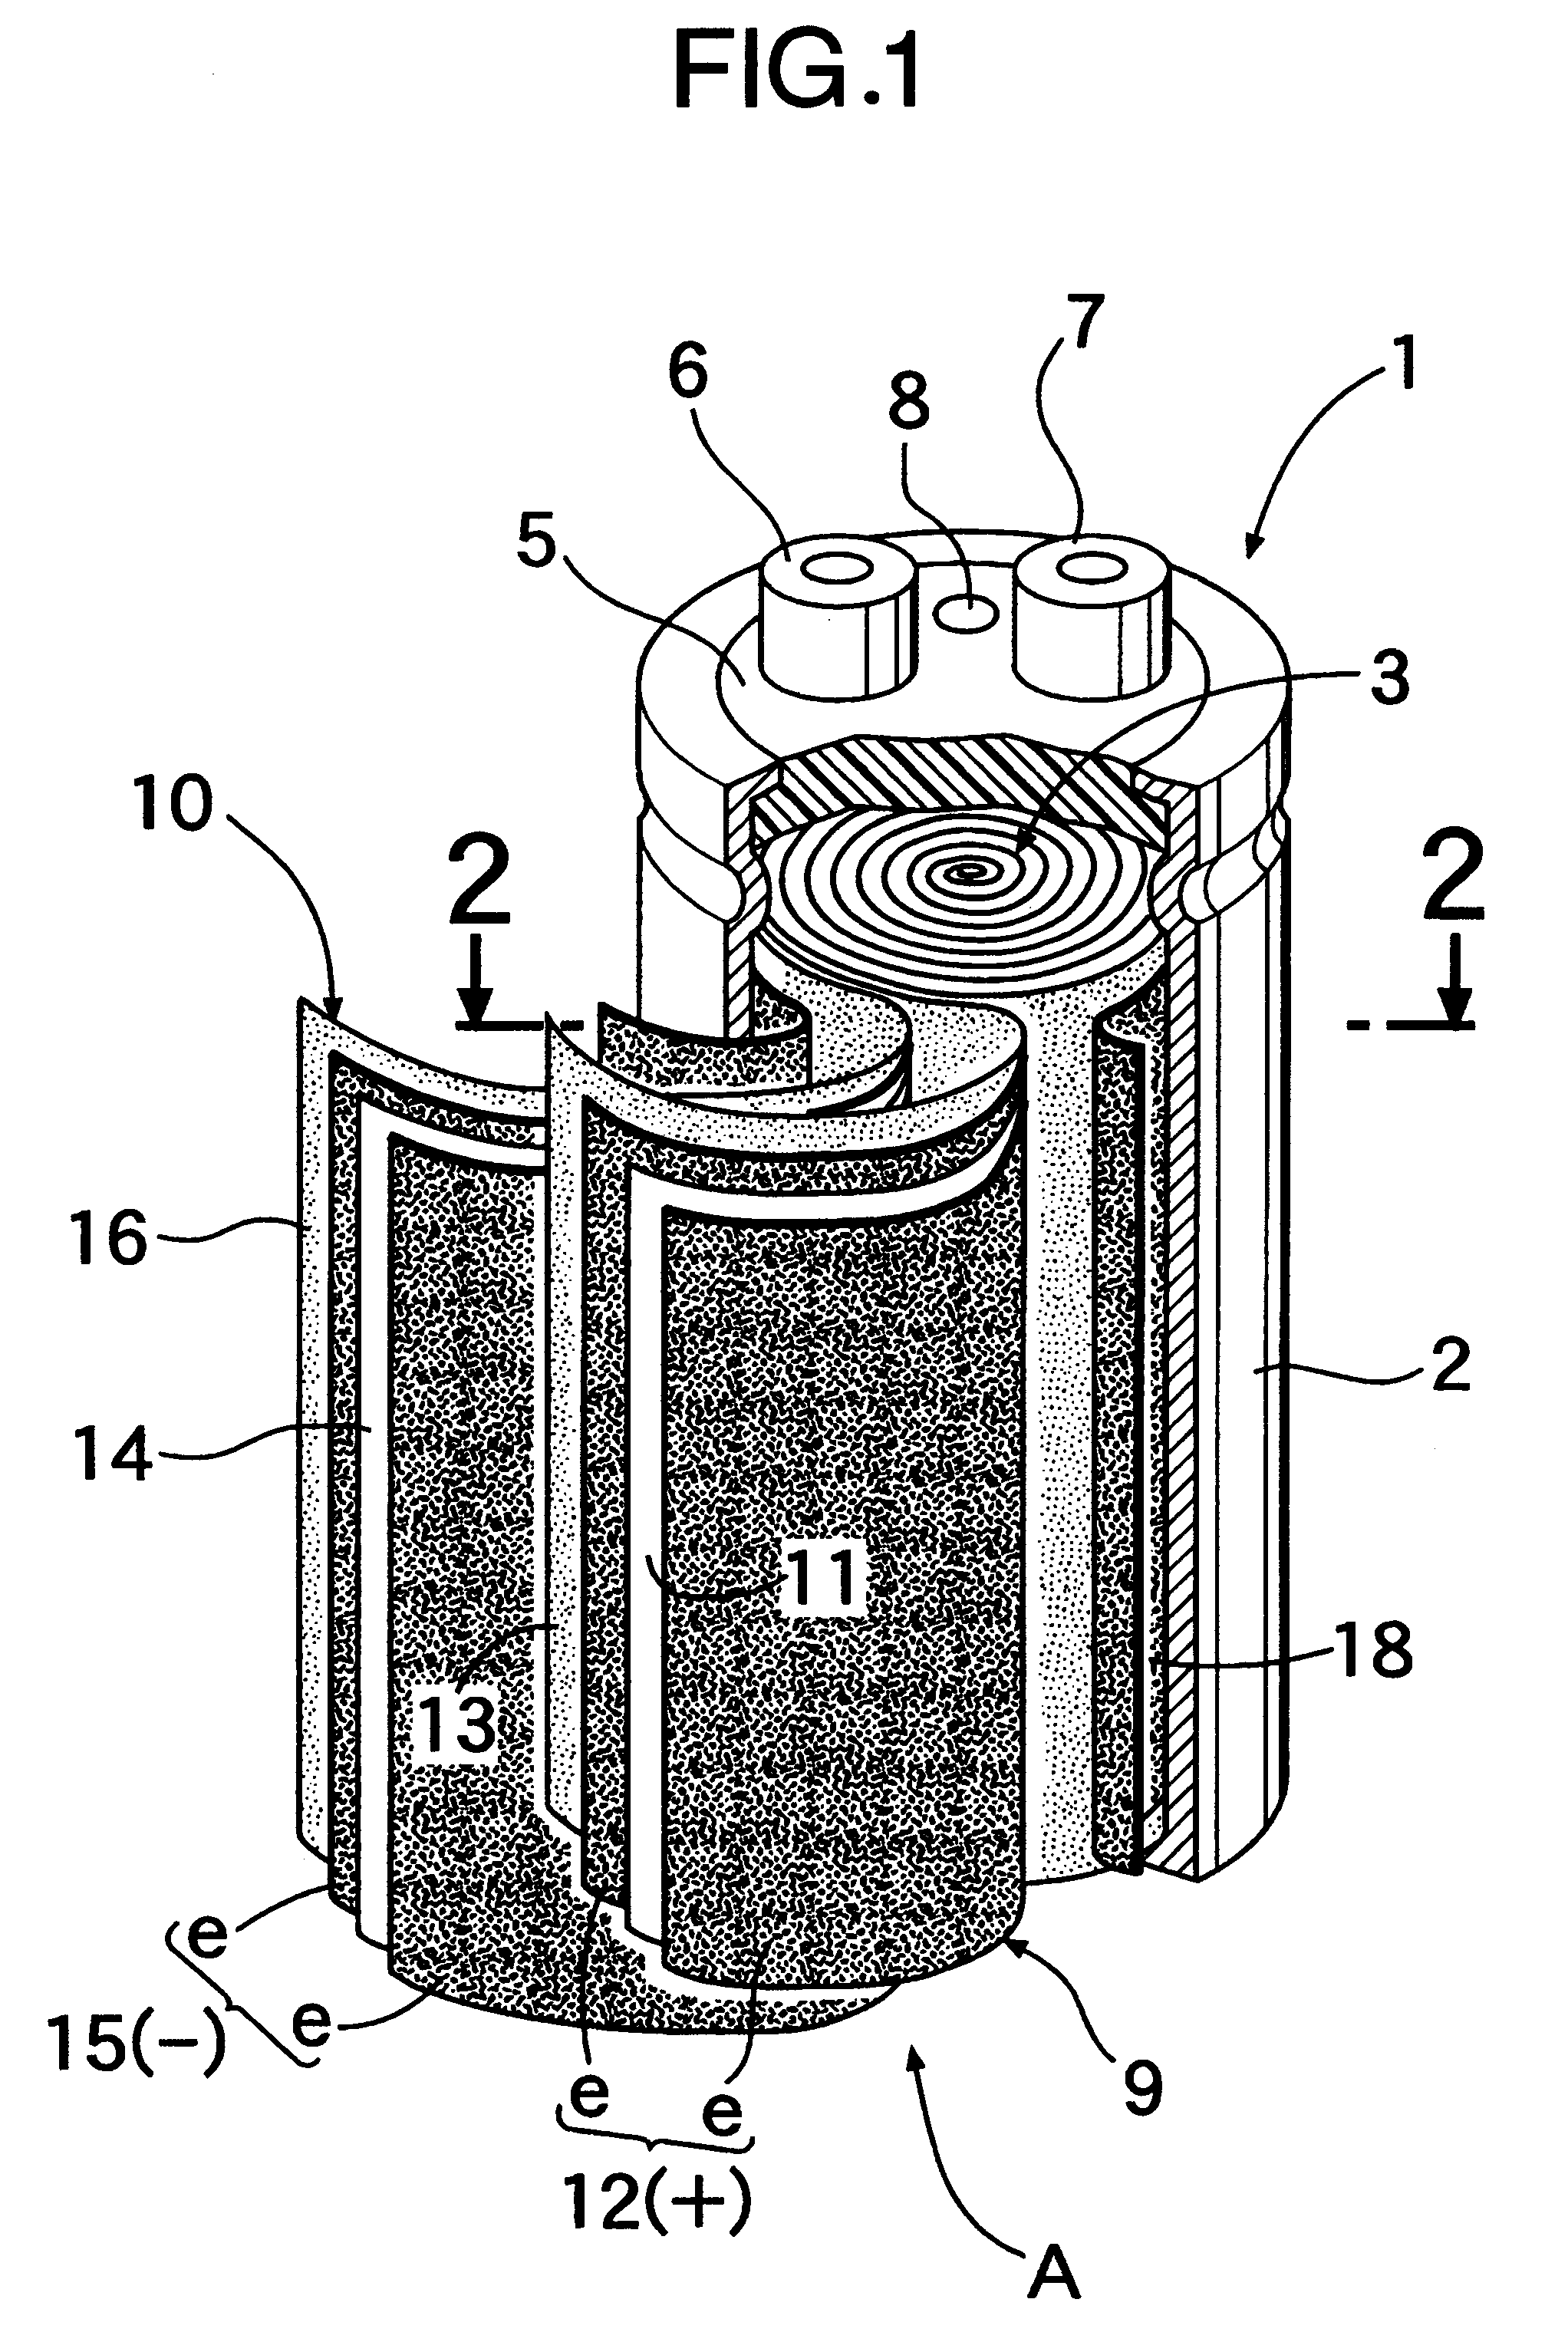 Tubular electric double-layer capacitor